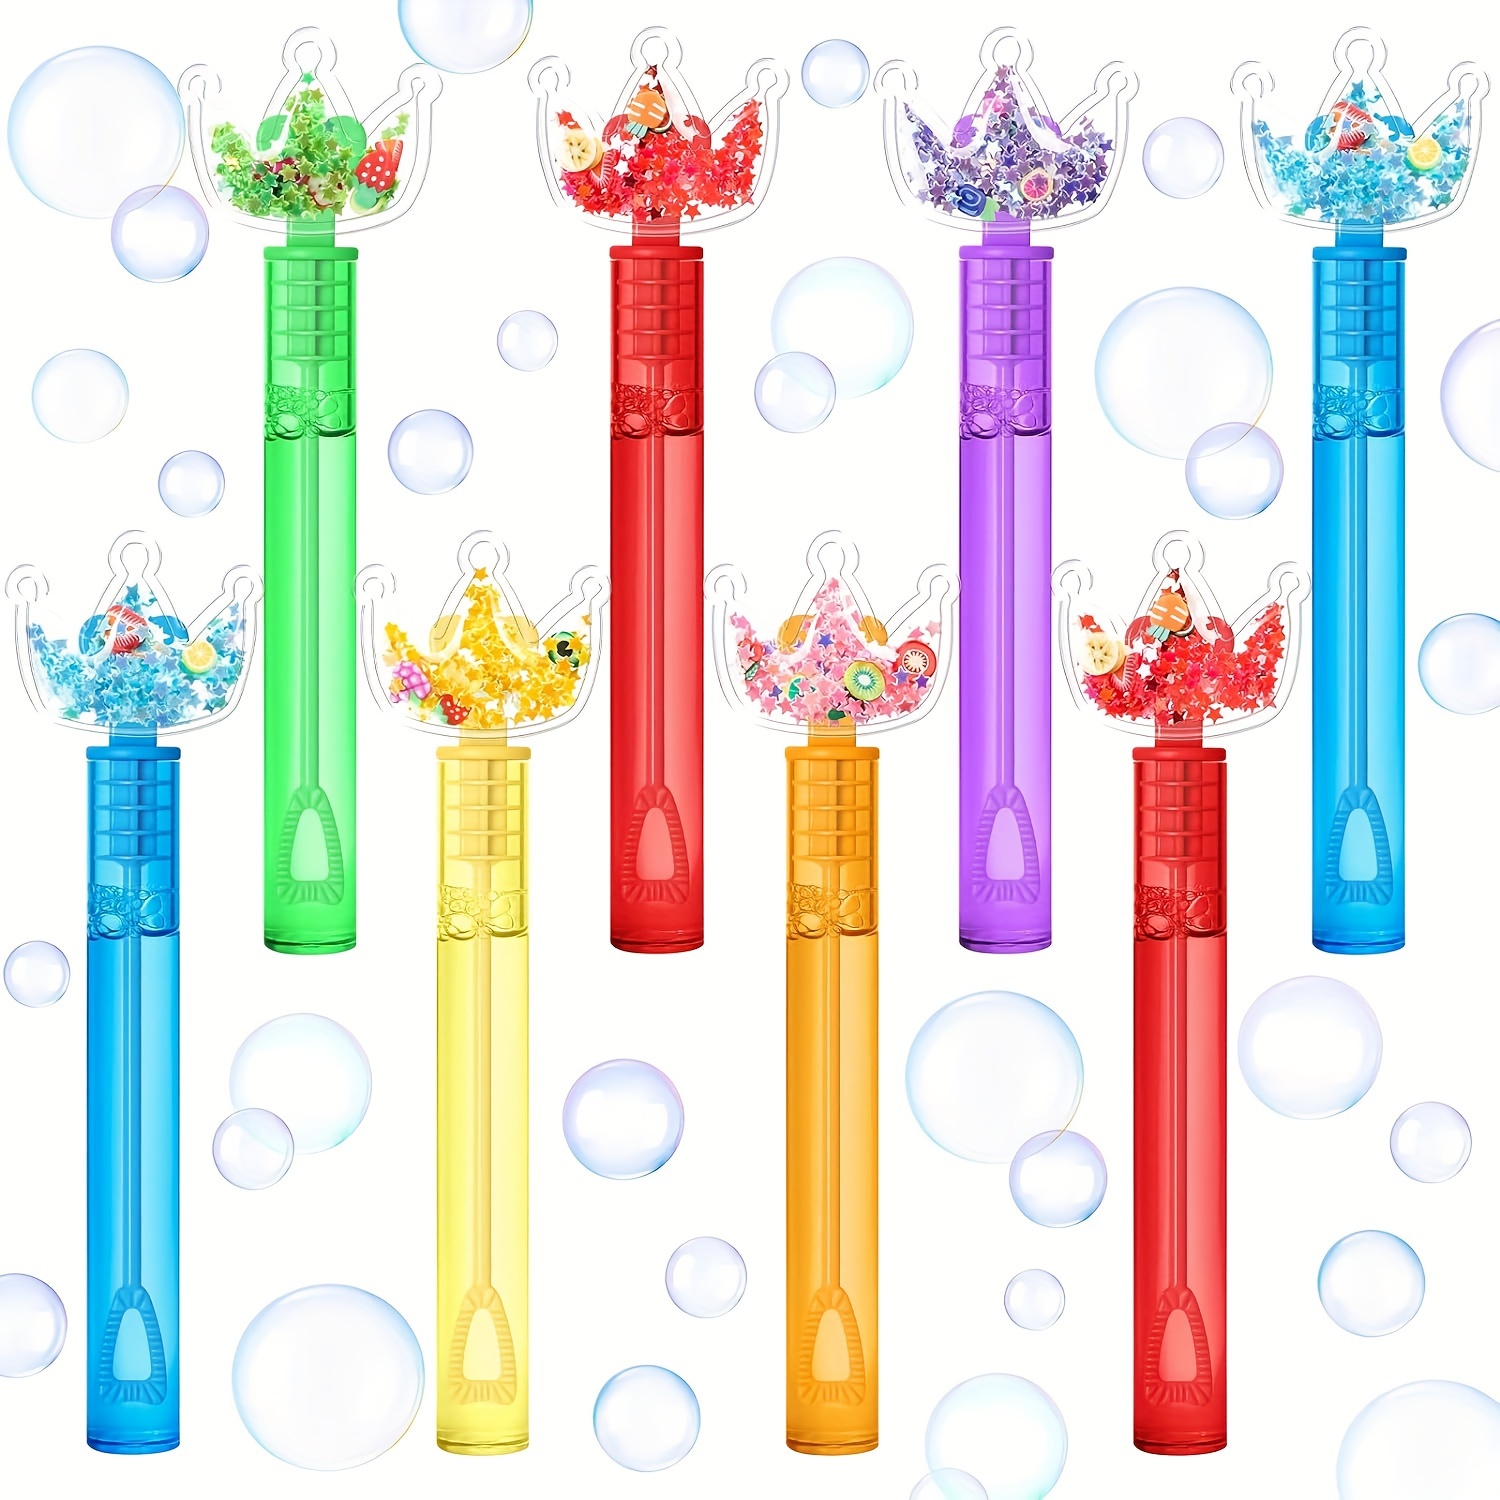 

24pcs Glitter Princess Bubble Wands For Kids, Crown Party Favors Mini Bubbles Birthday Gift Toy Goodie Bag Stuffers Classroom Prizes Wedding Party Supplies